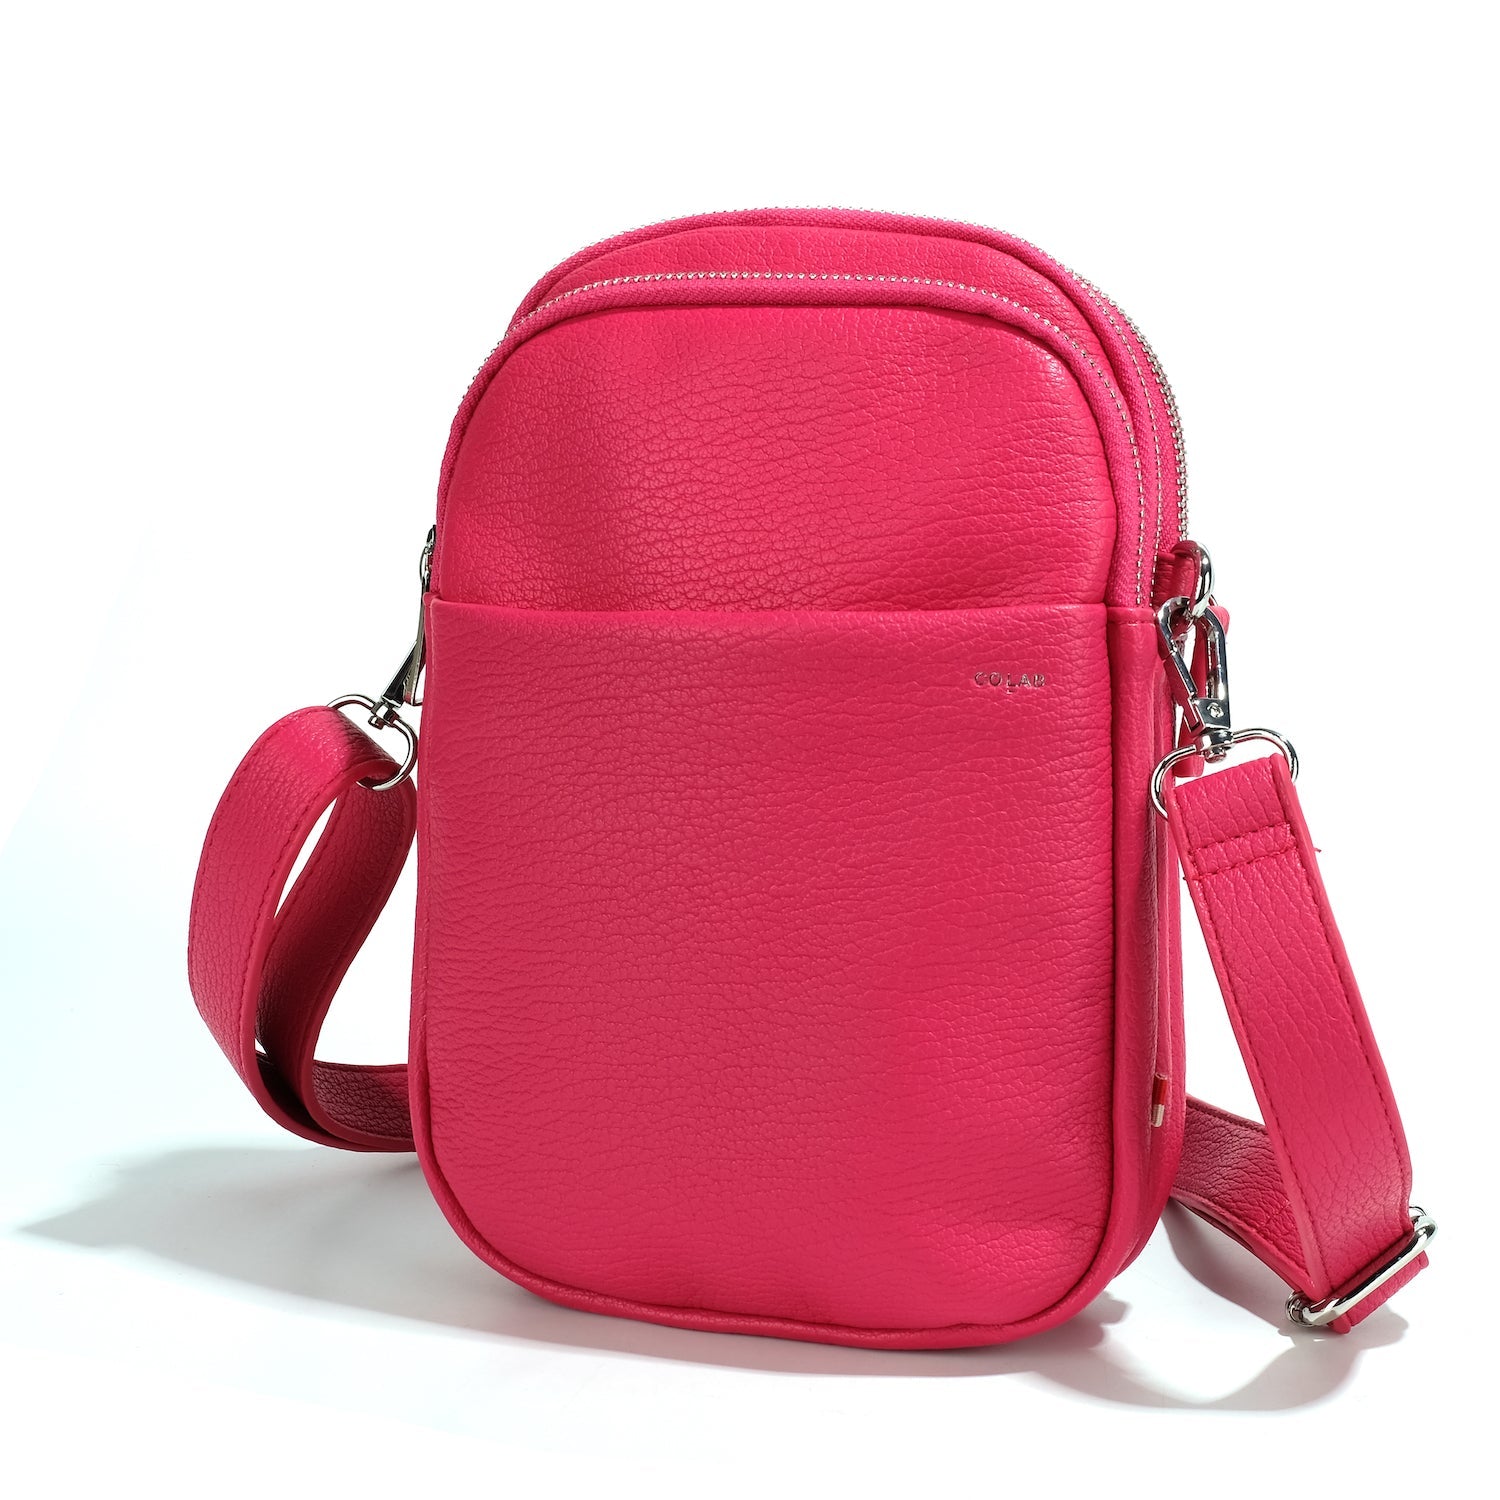 co-lab Park Lane Crossbody - Beetroot Accessories - Other Accessories - Handbags & Wallets by co-lab | Grace the Boutique